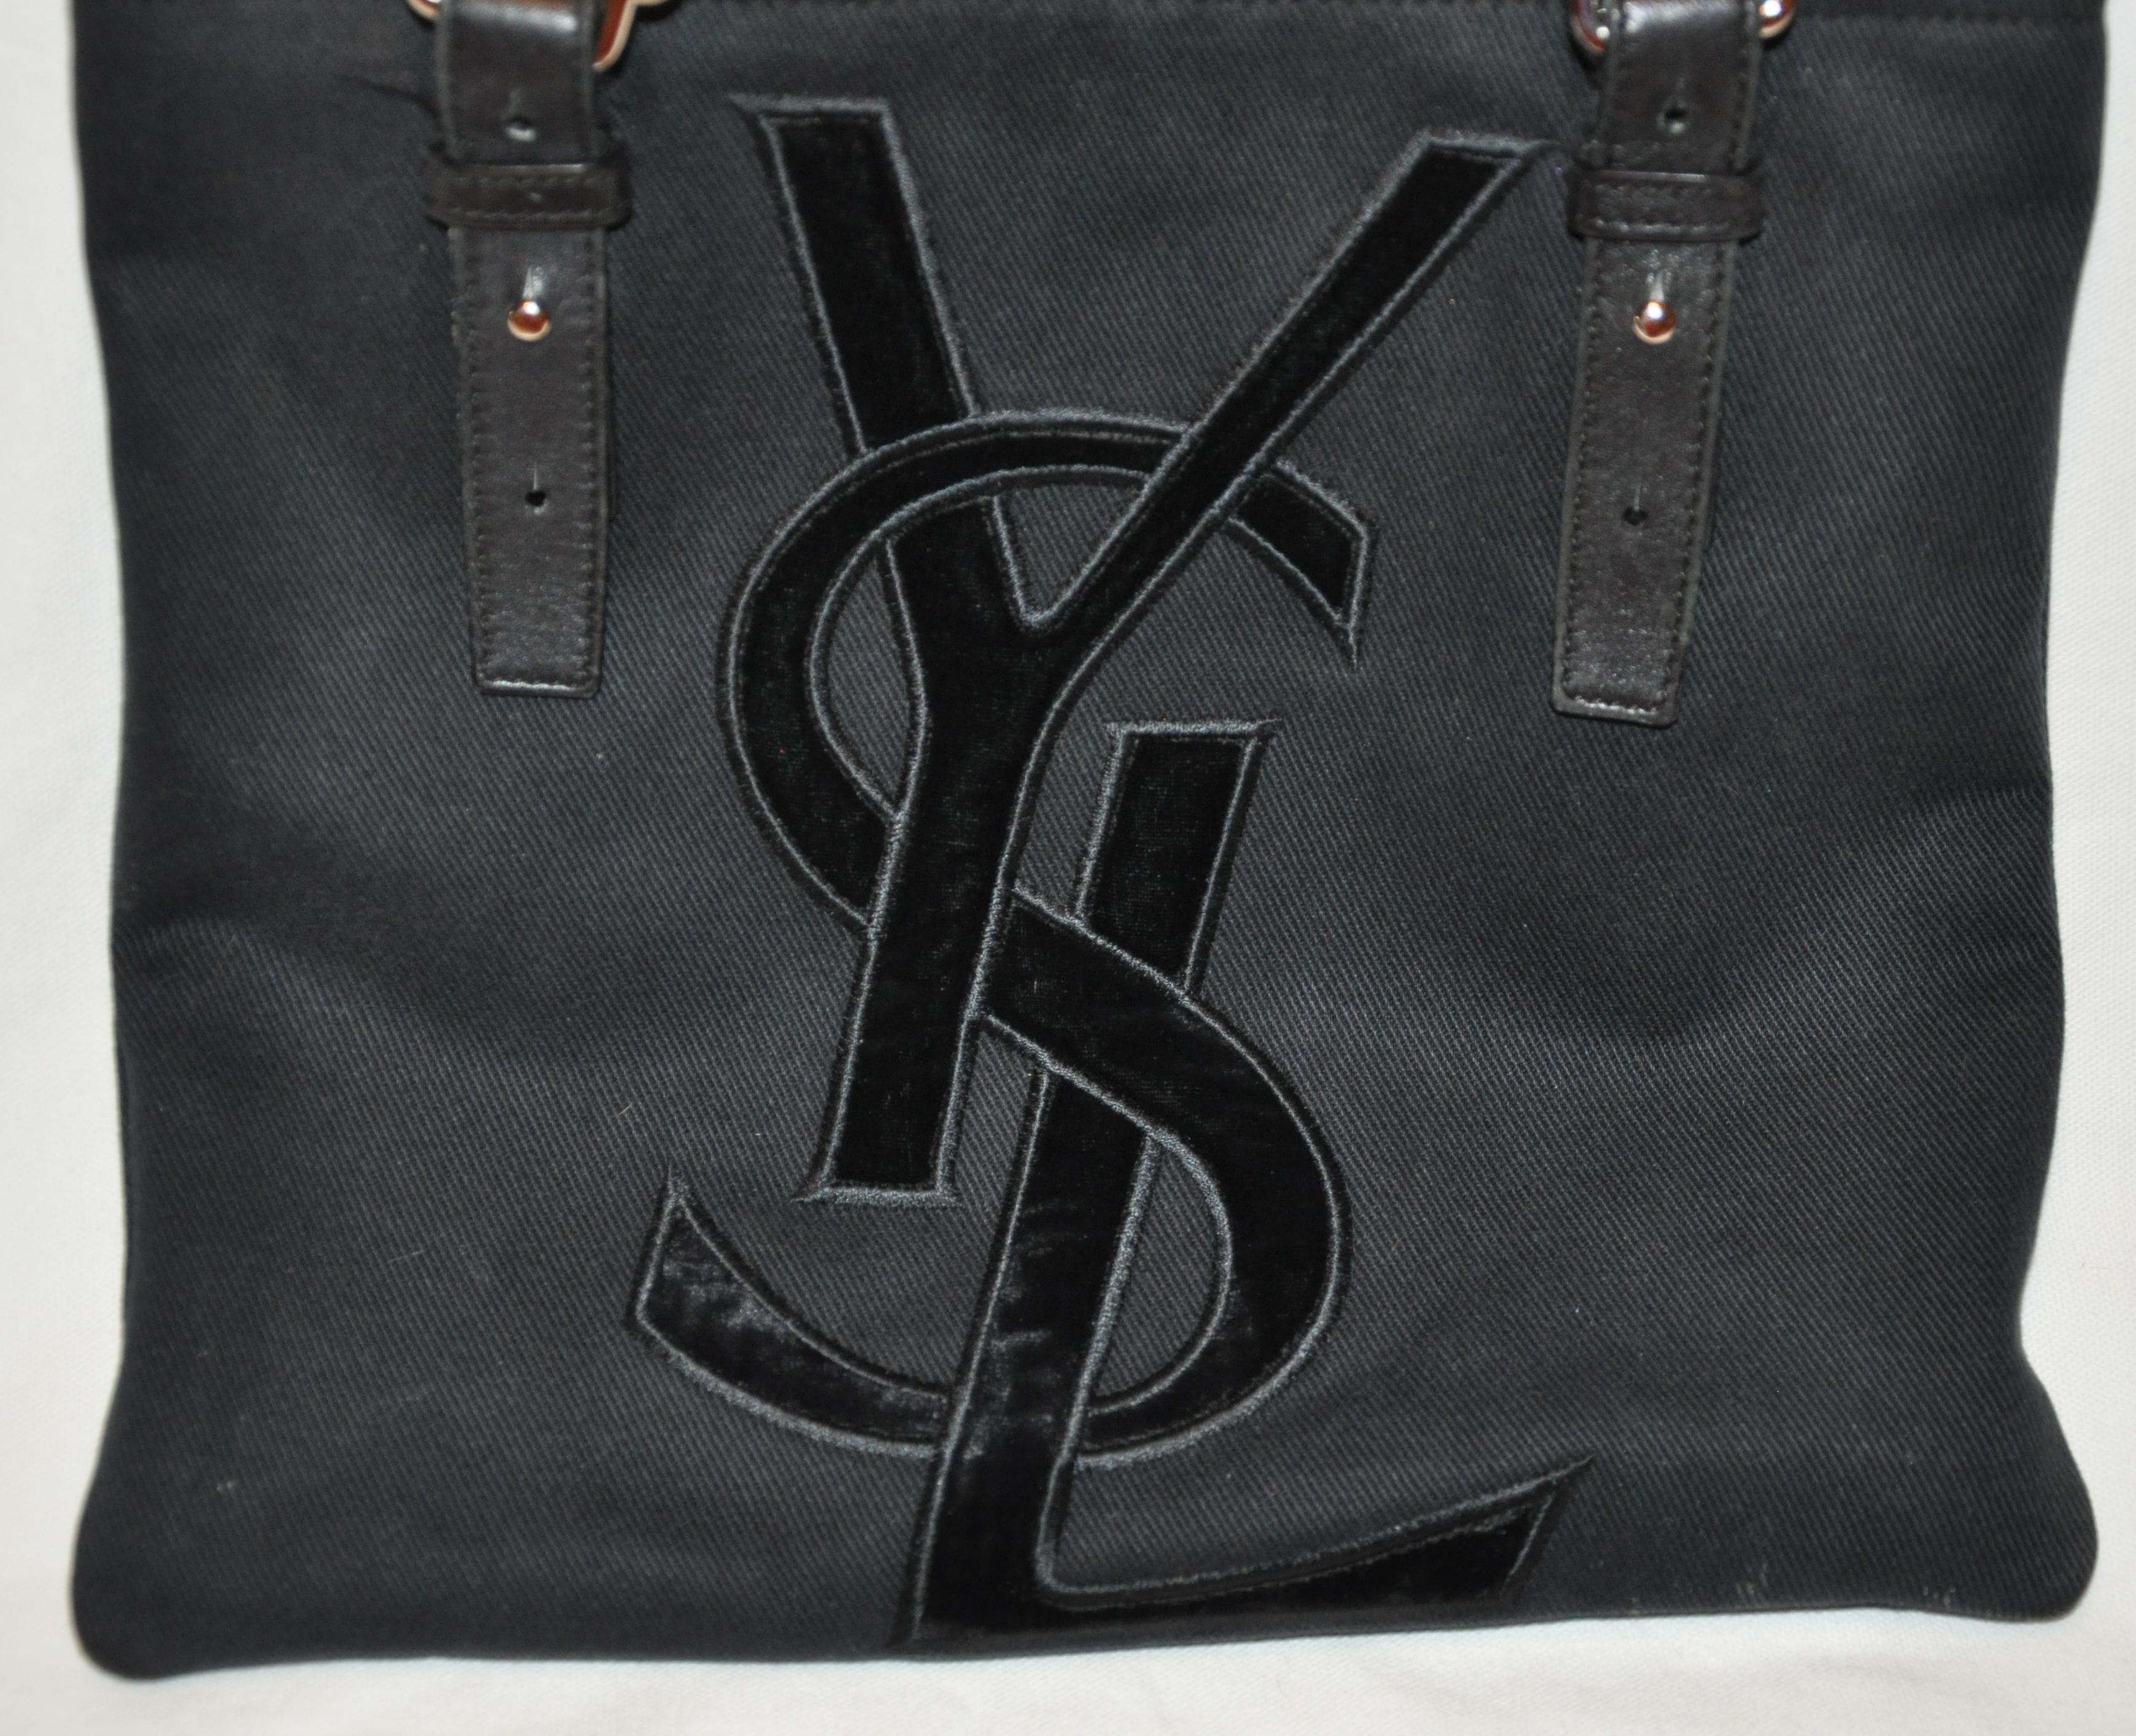        Yves Saint Laurent wonderful signature velvet monogram front adjustable double handle tote bag is detailed with adjustable handles measuring from 10 1/2 to 13 1/2 inches. The handles are combined with black calfskin as well as black canvas